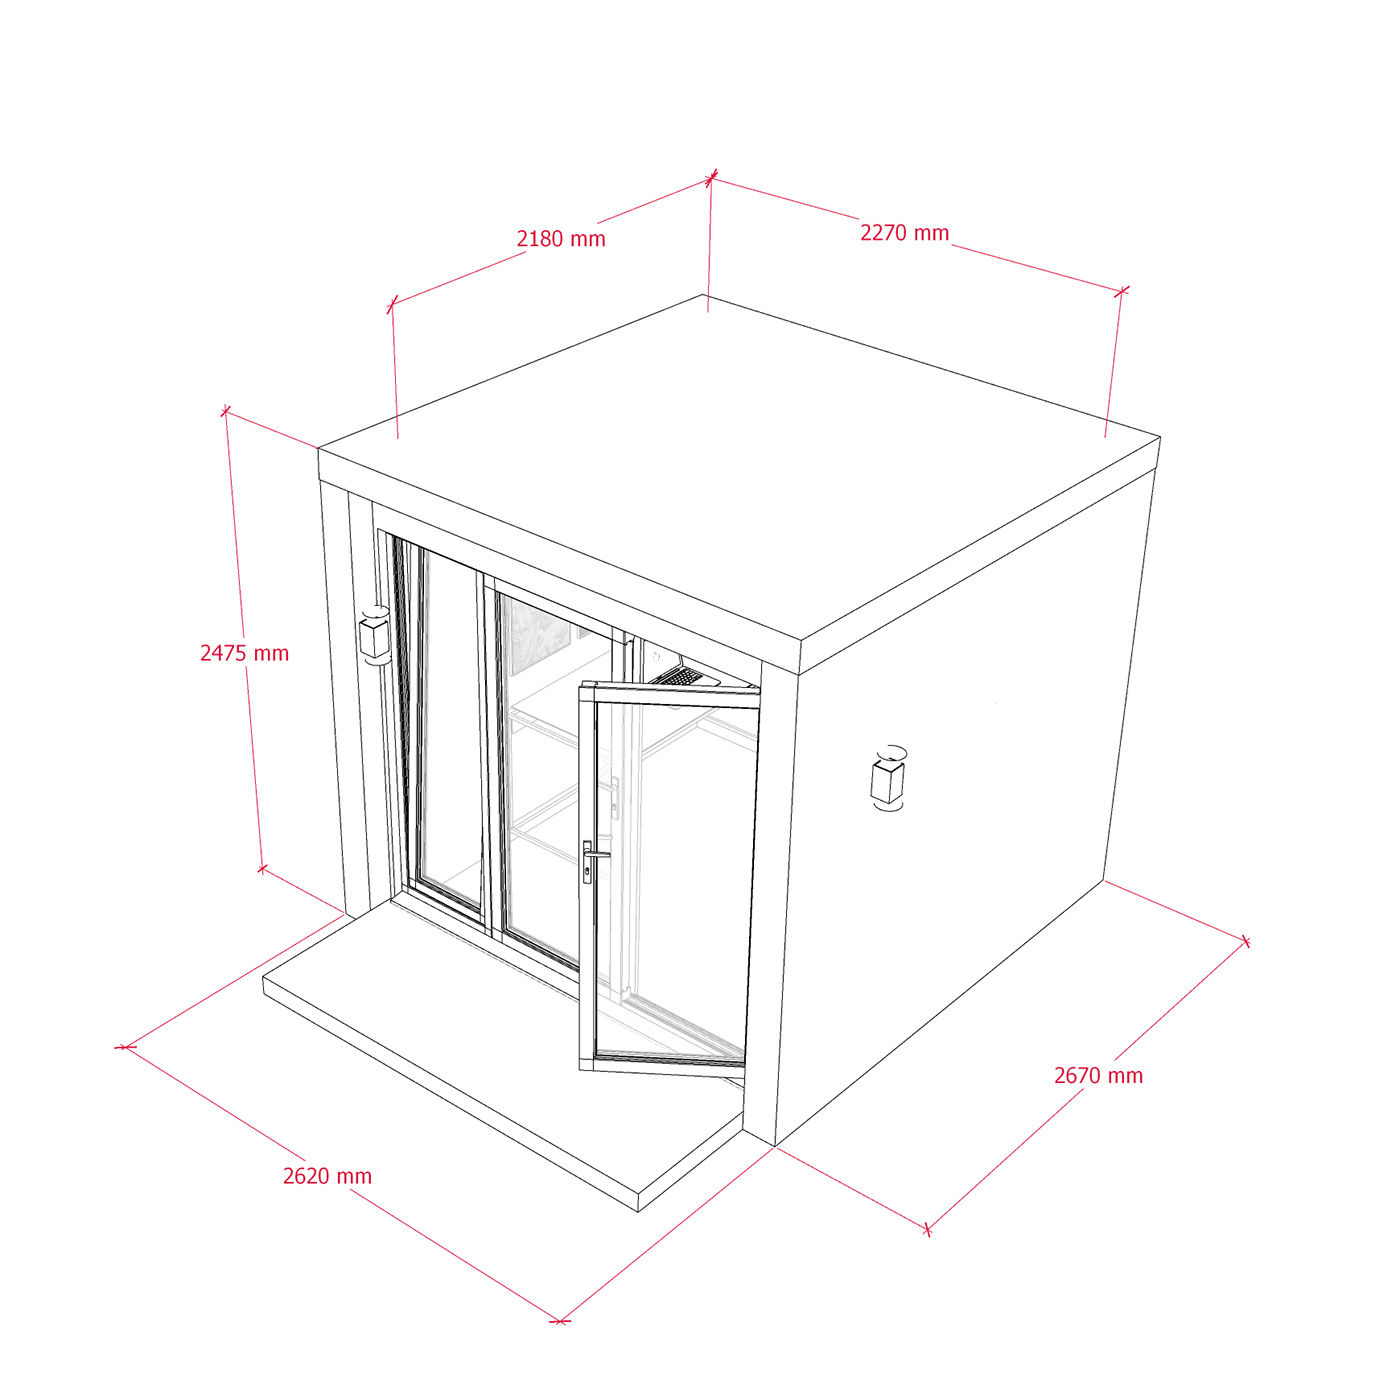 Exterior dimensions of 2.6m by 2.6m garden office